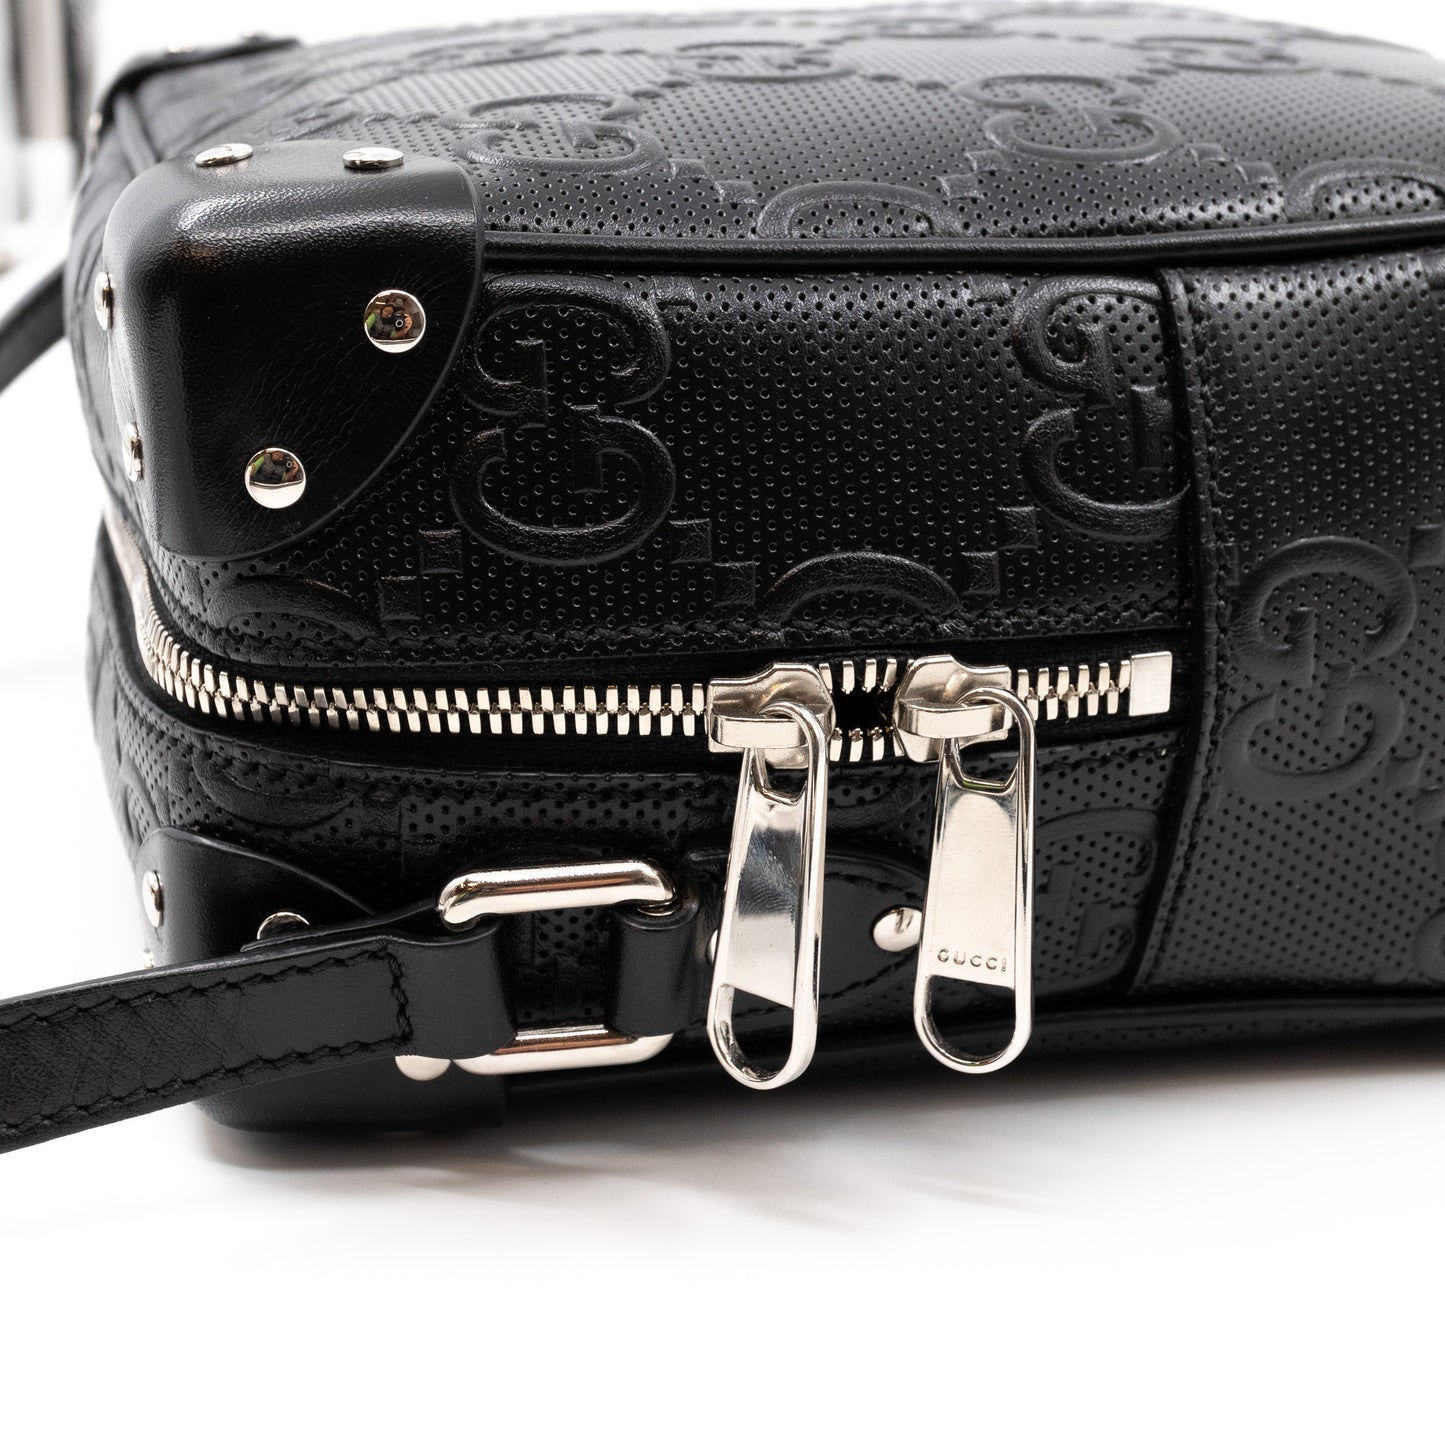 GG Embossed Trunk Bag Black Leather